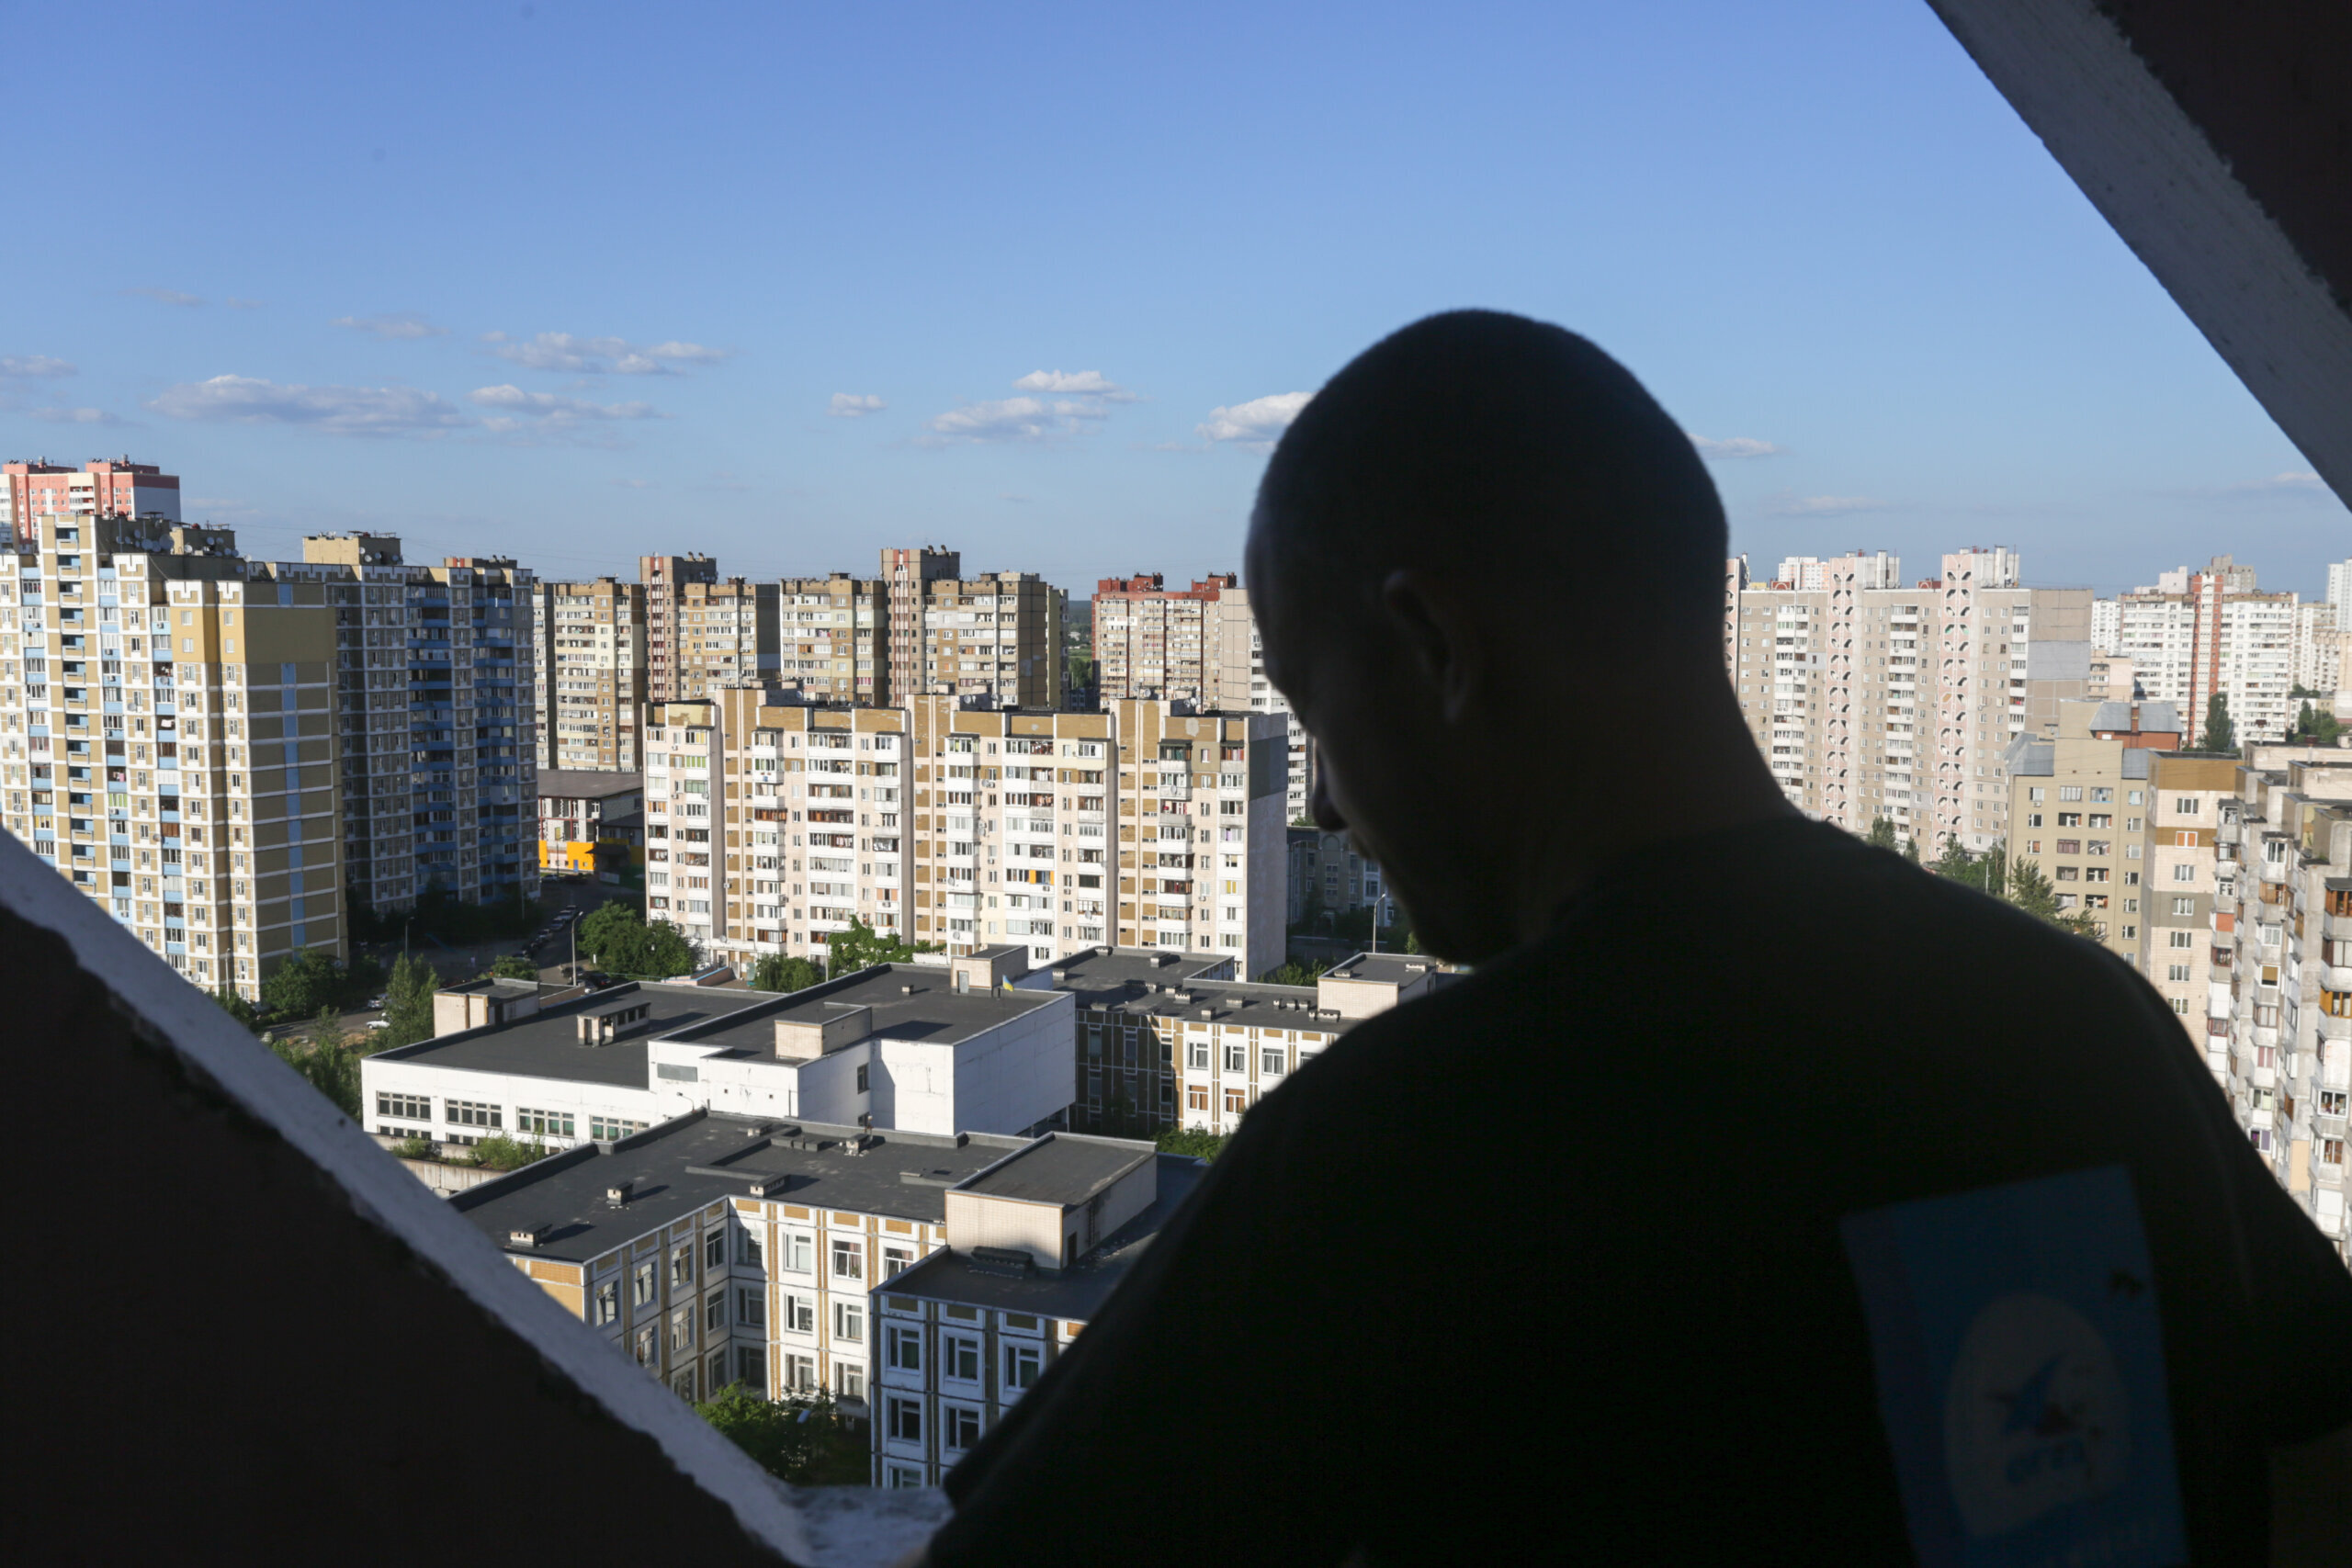 The view for many residents of the Troieshchyna neighborhood is the repetitive, monotonous landscape of Soviet apartment buildings built in the 1980s.